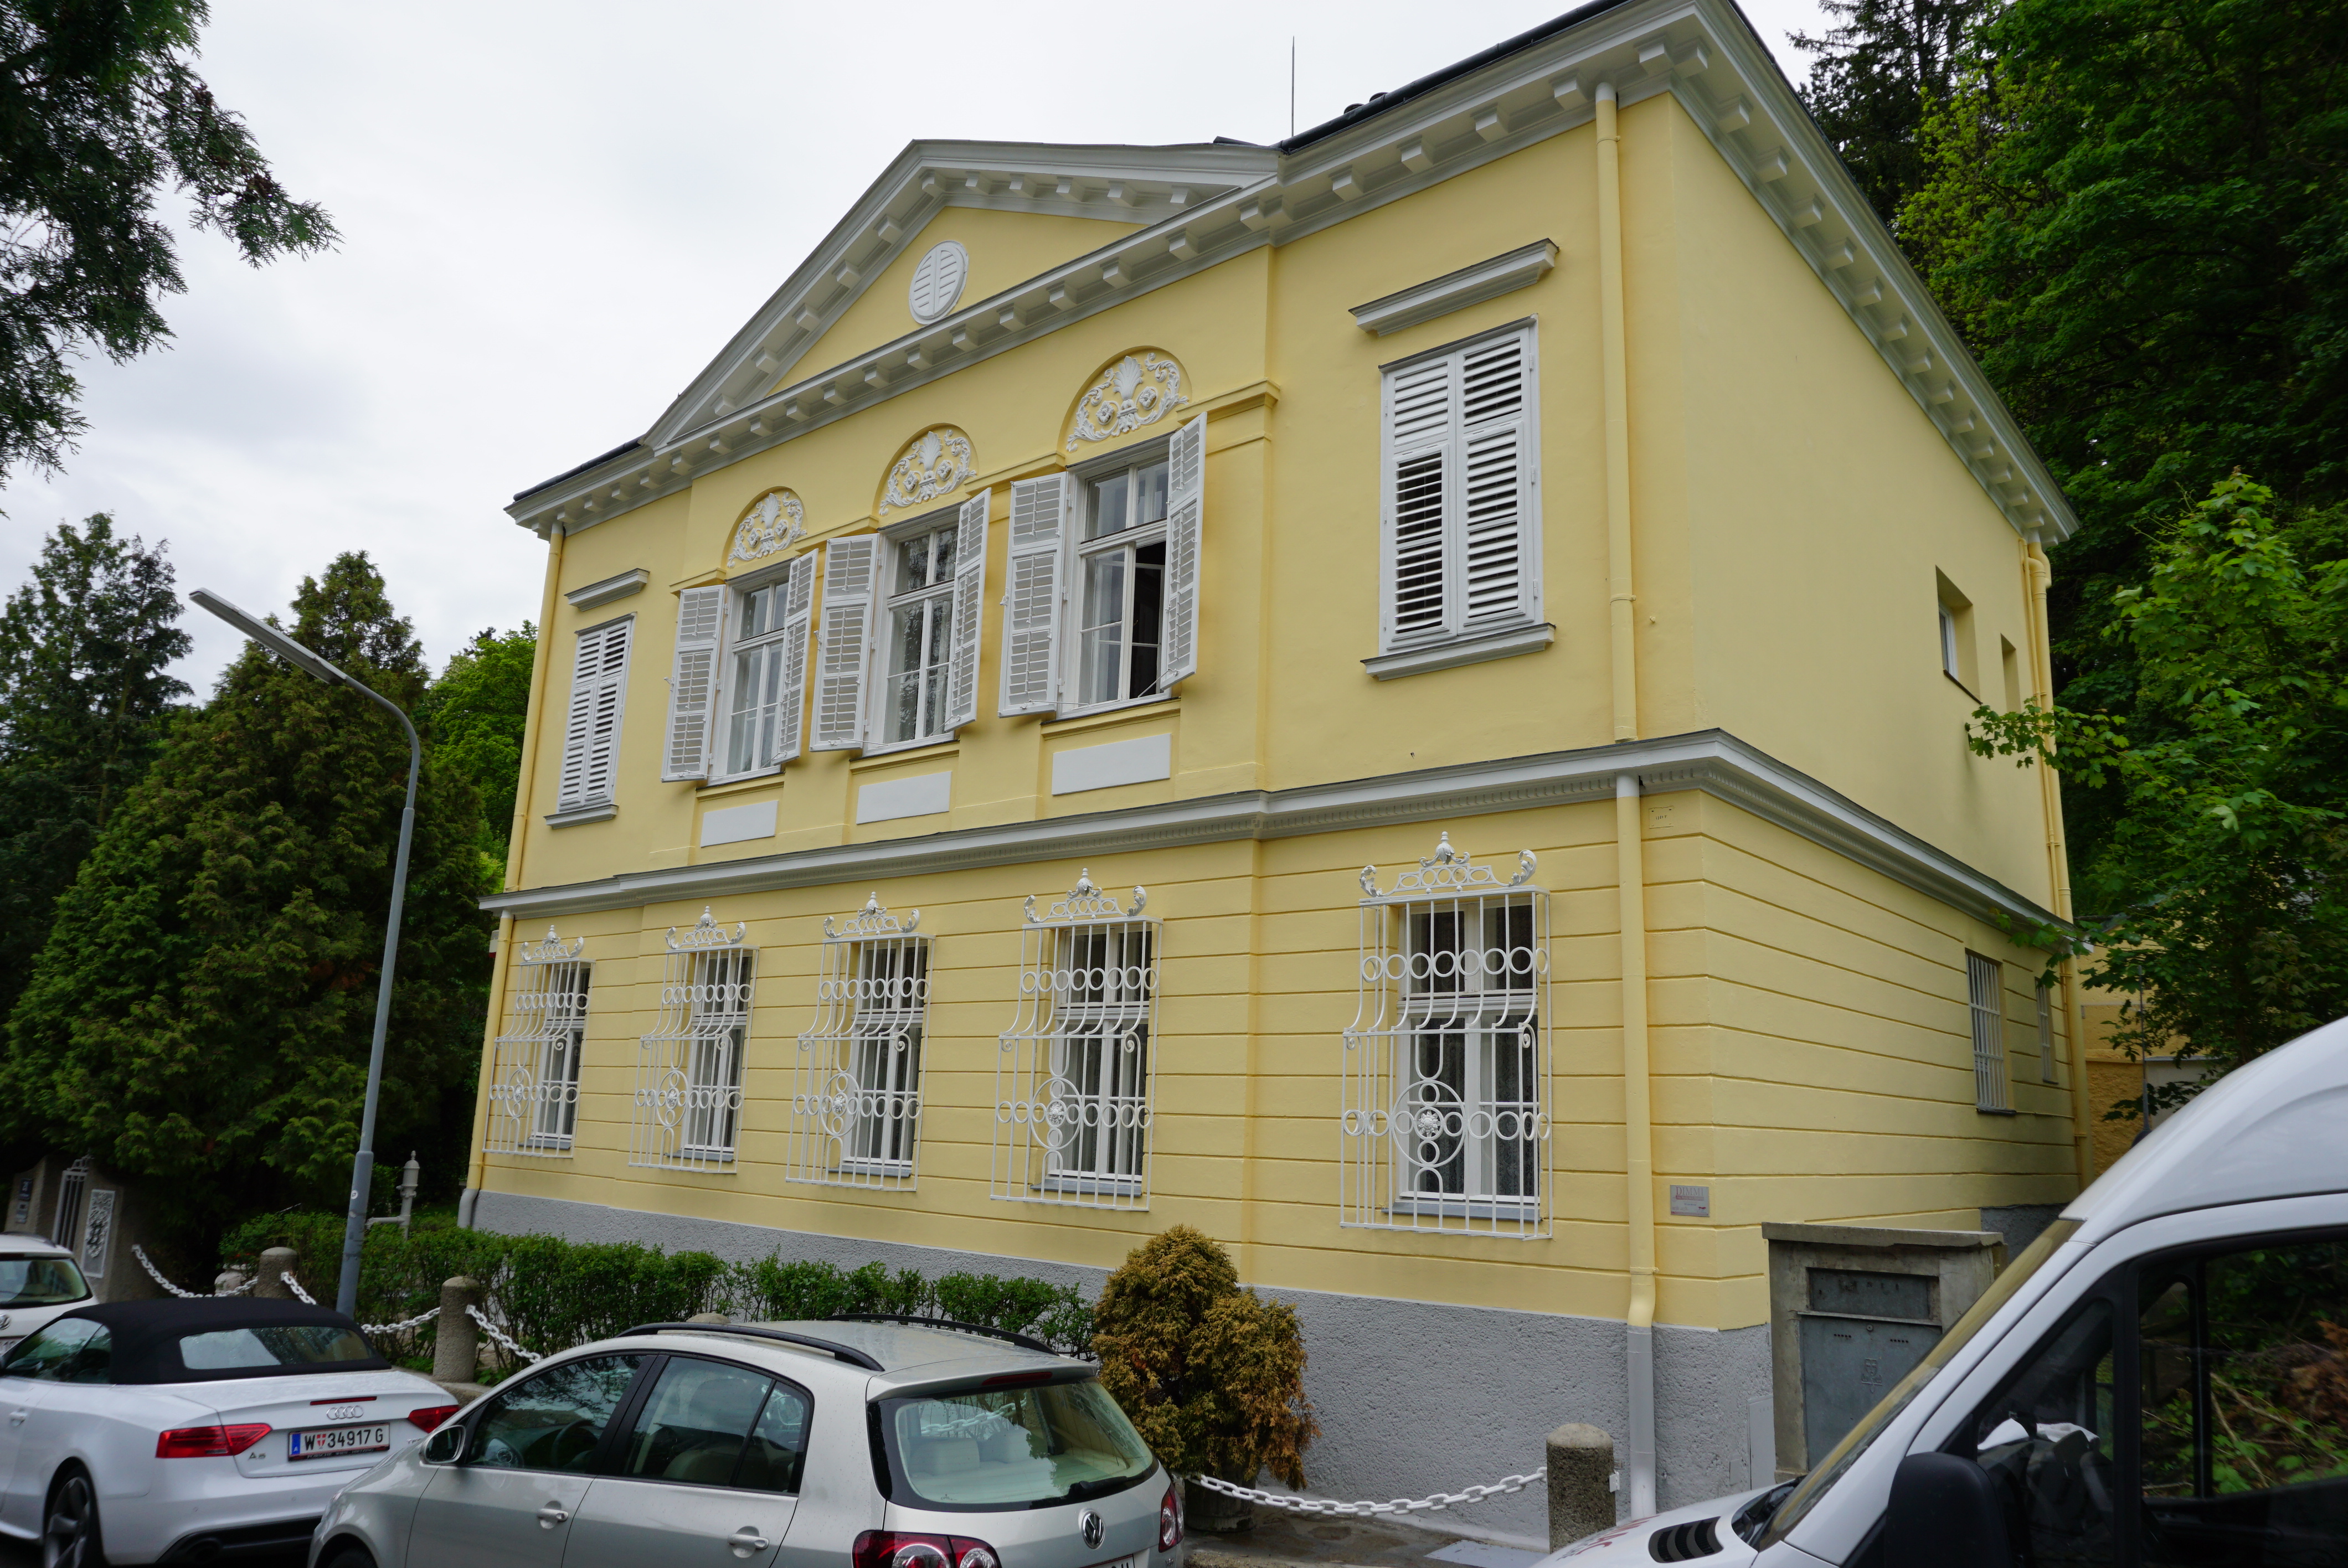 Exterior view of a two-storey townhouse painted pale yellow with white windows and shutters